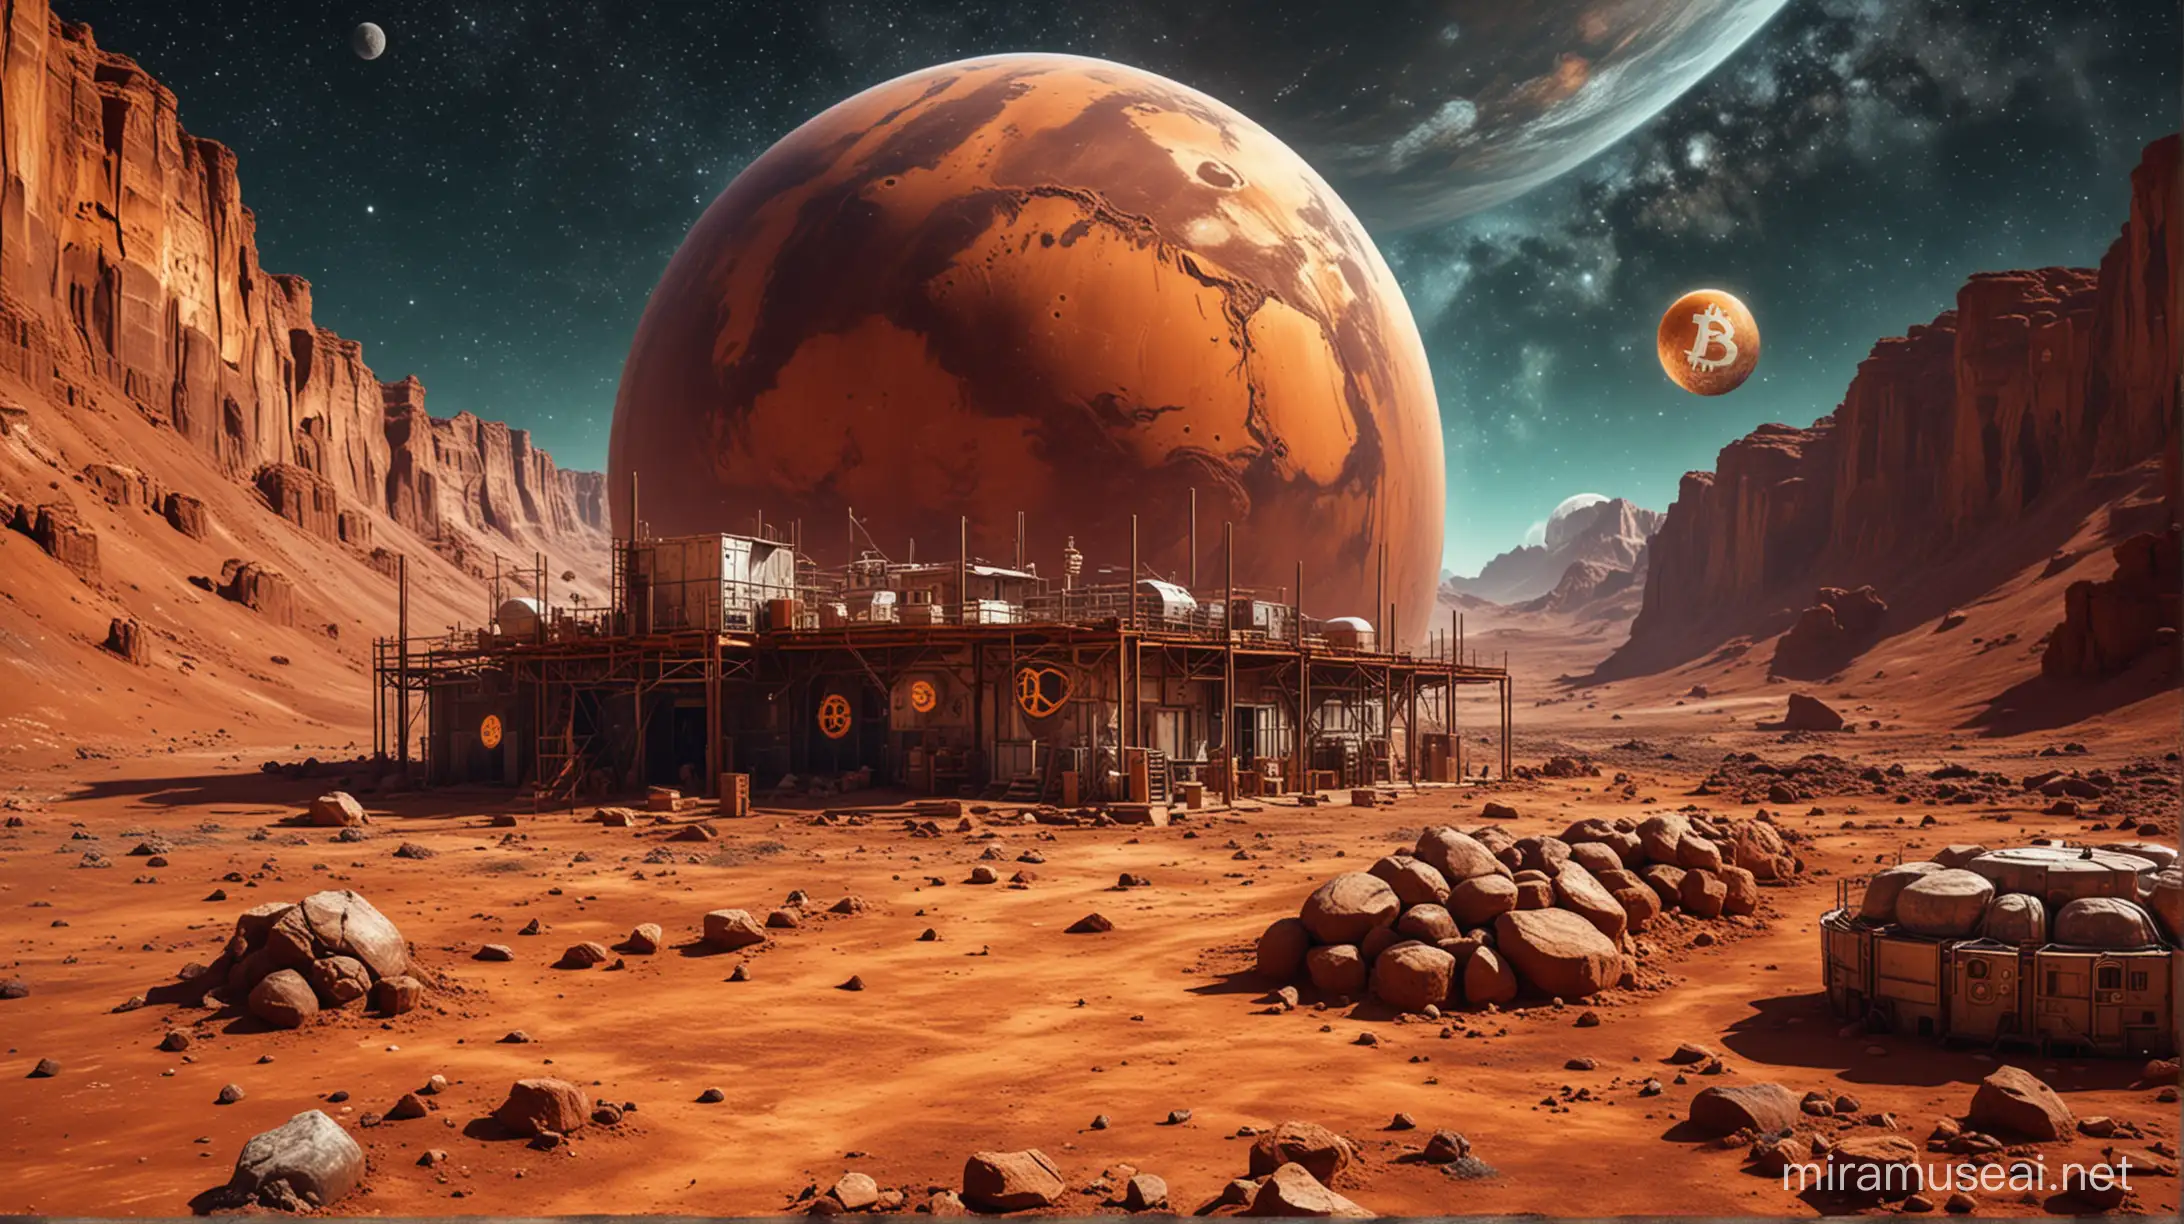 mars planet in rustic version, put some space head quarters with old and rust, put crypto curency backgound with bitcoin 